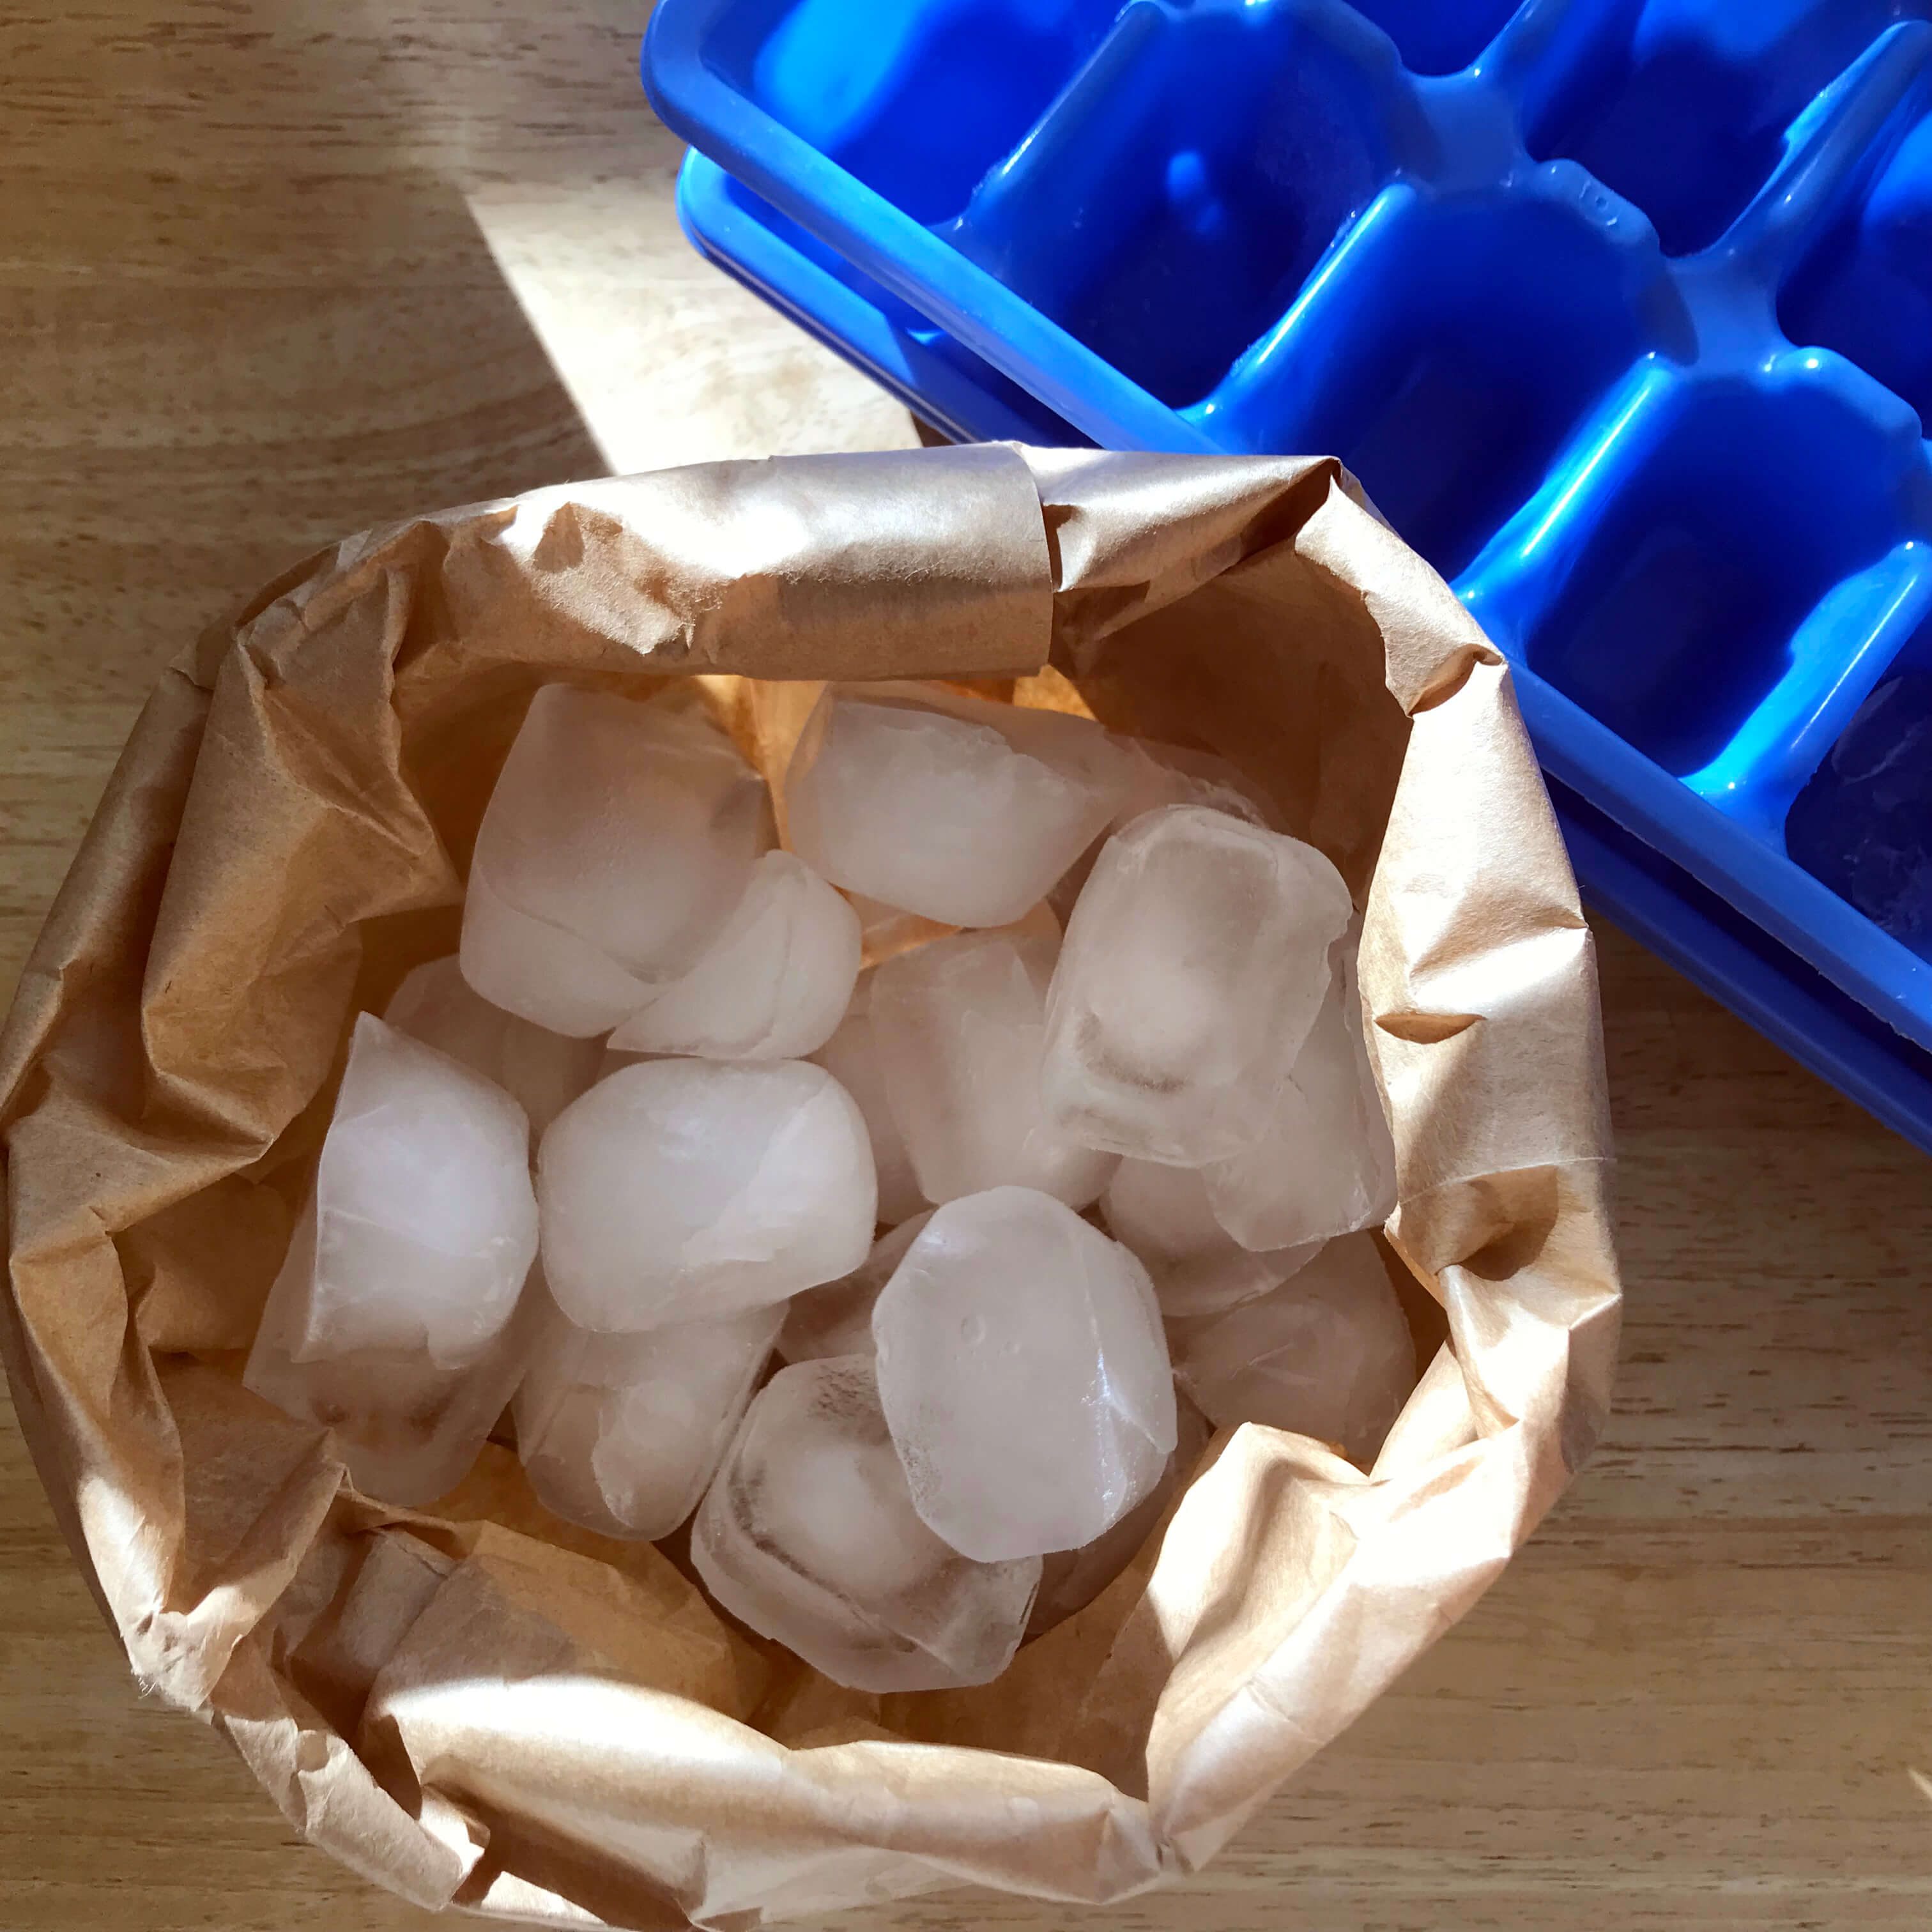 How to Keep Ice Cubes from Sticking Together